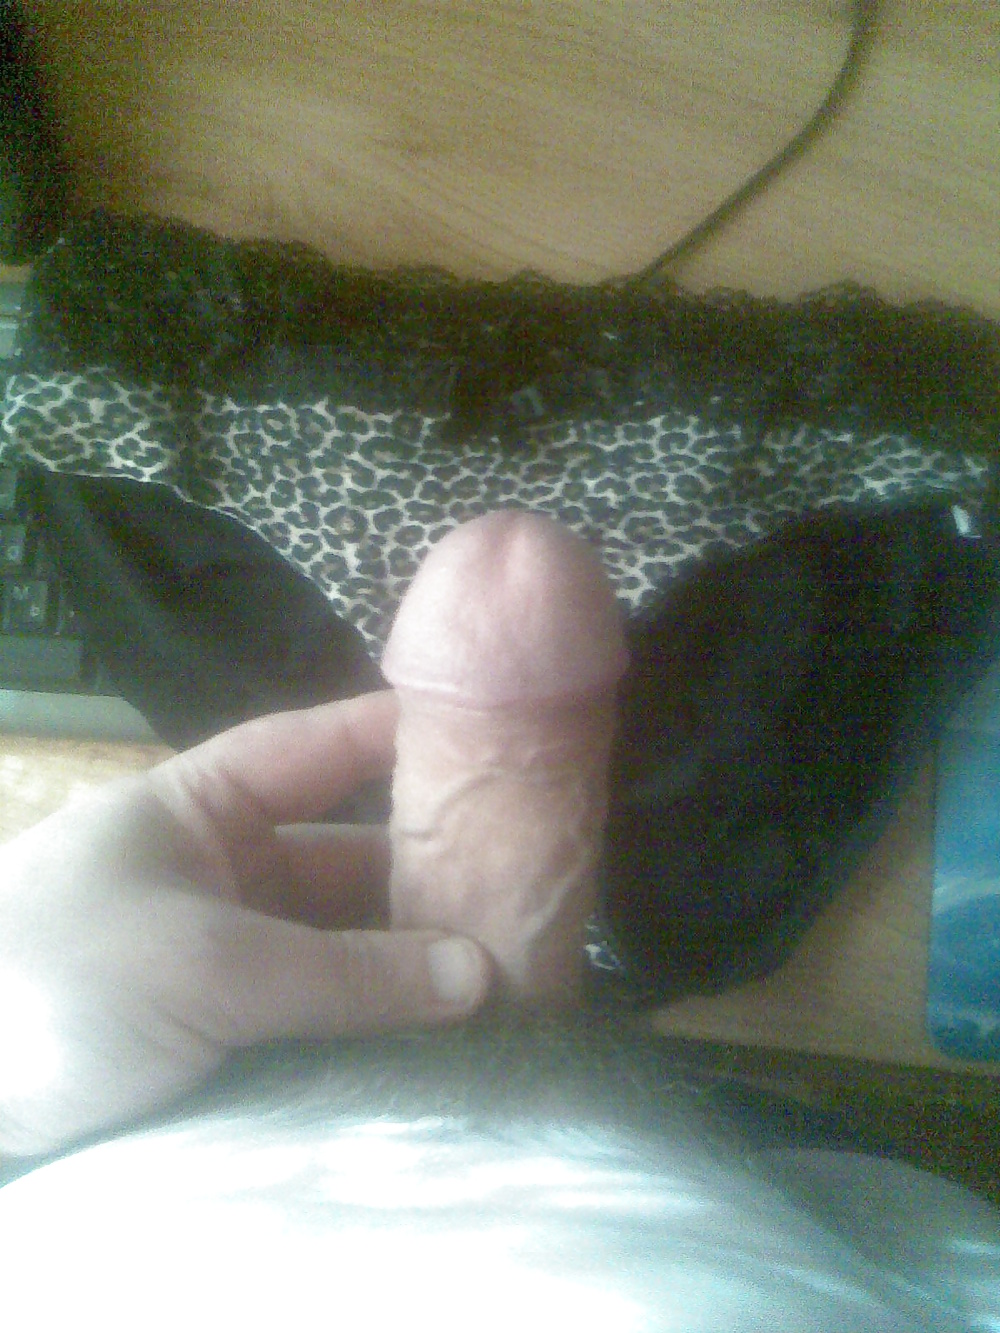 My cock and her mother's panties